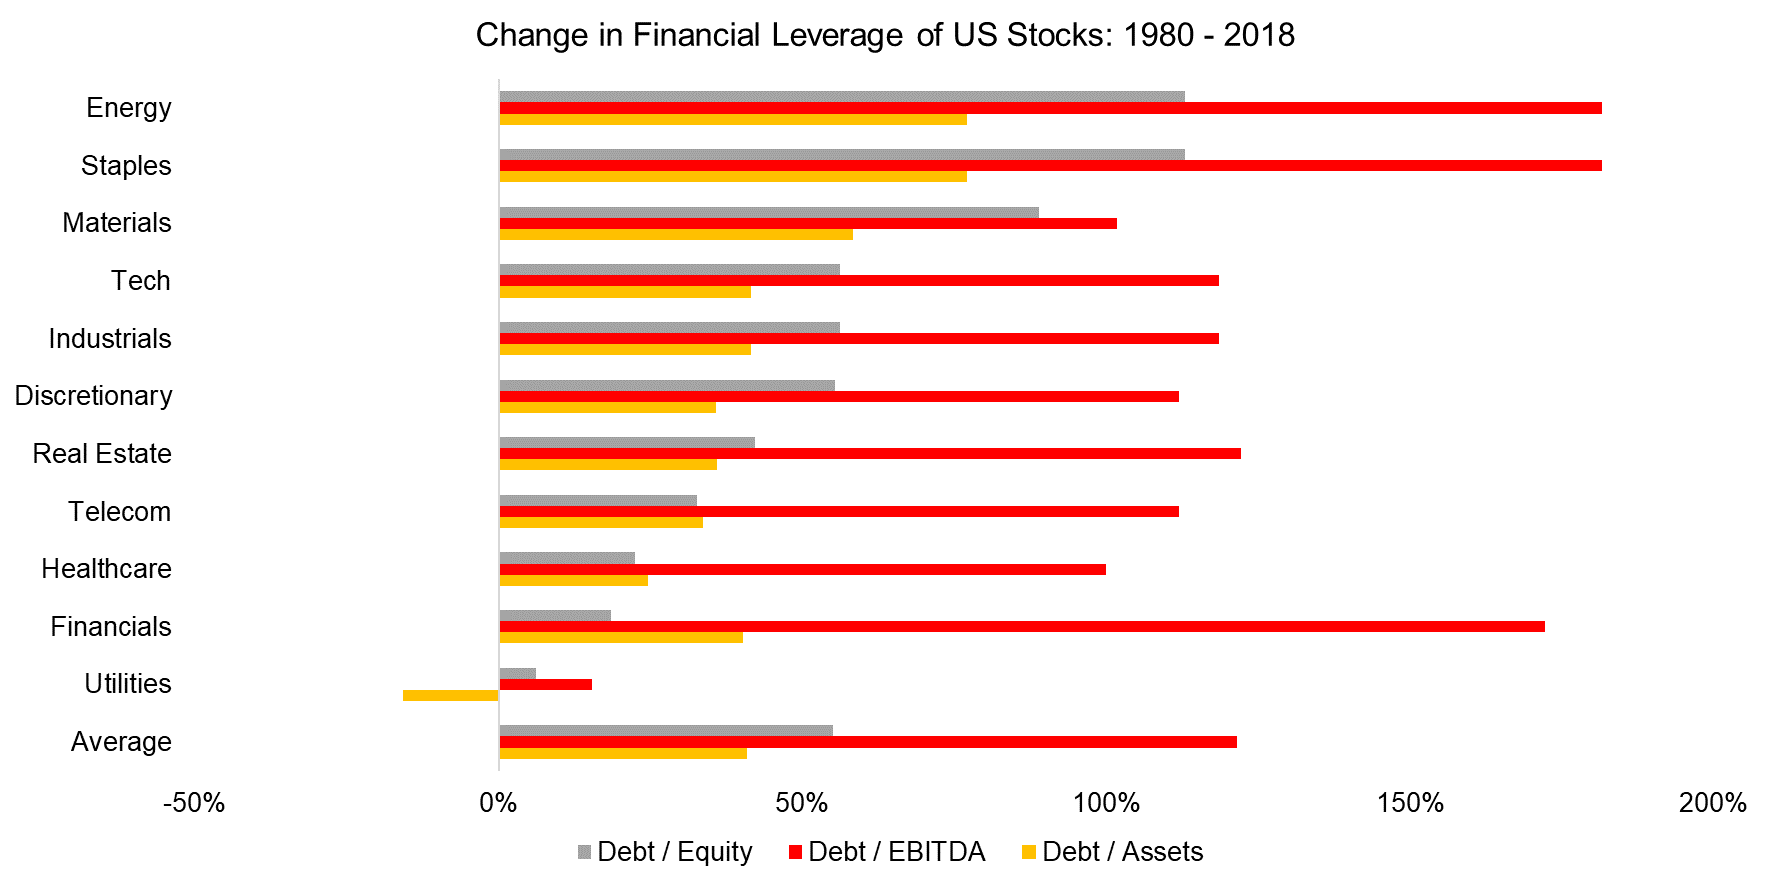 Change in Financial Leverage of US Stocks 1980 - 2018